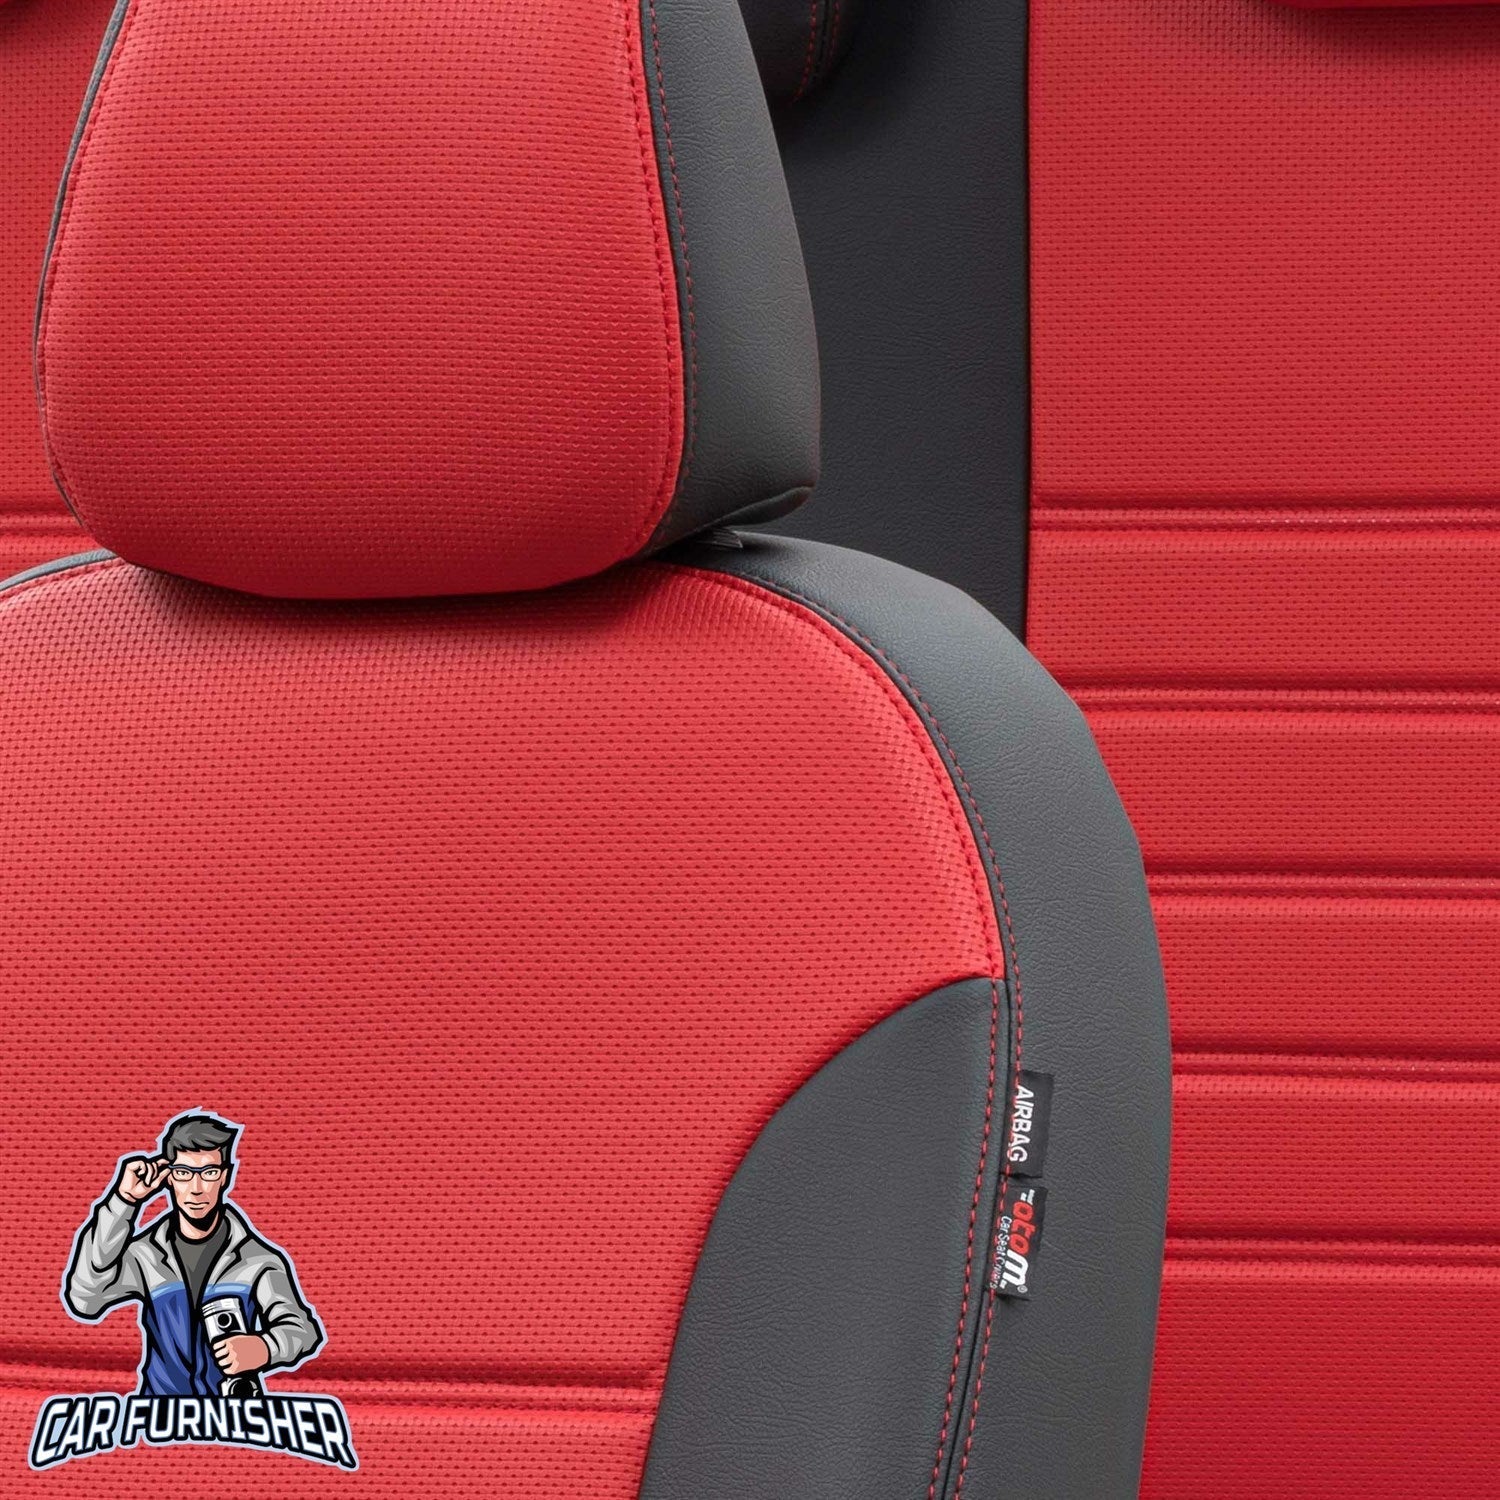 Citroen C-Elysee Seat Covers New York Leather Design Red Leather